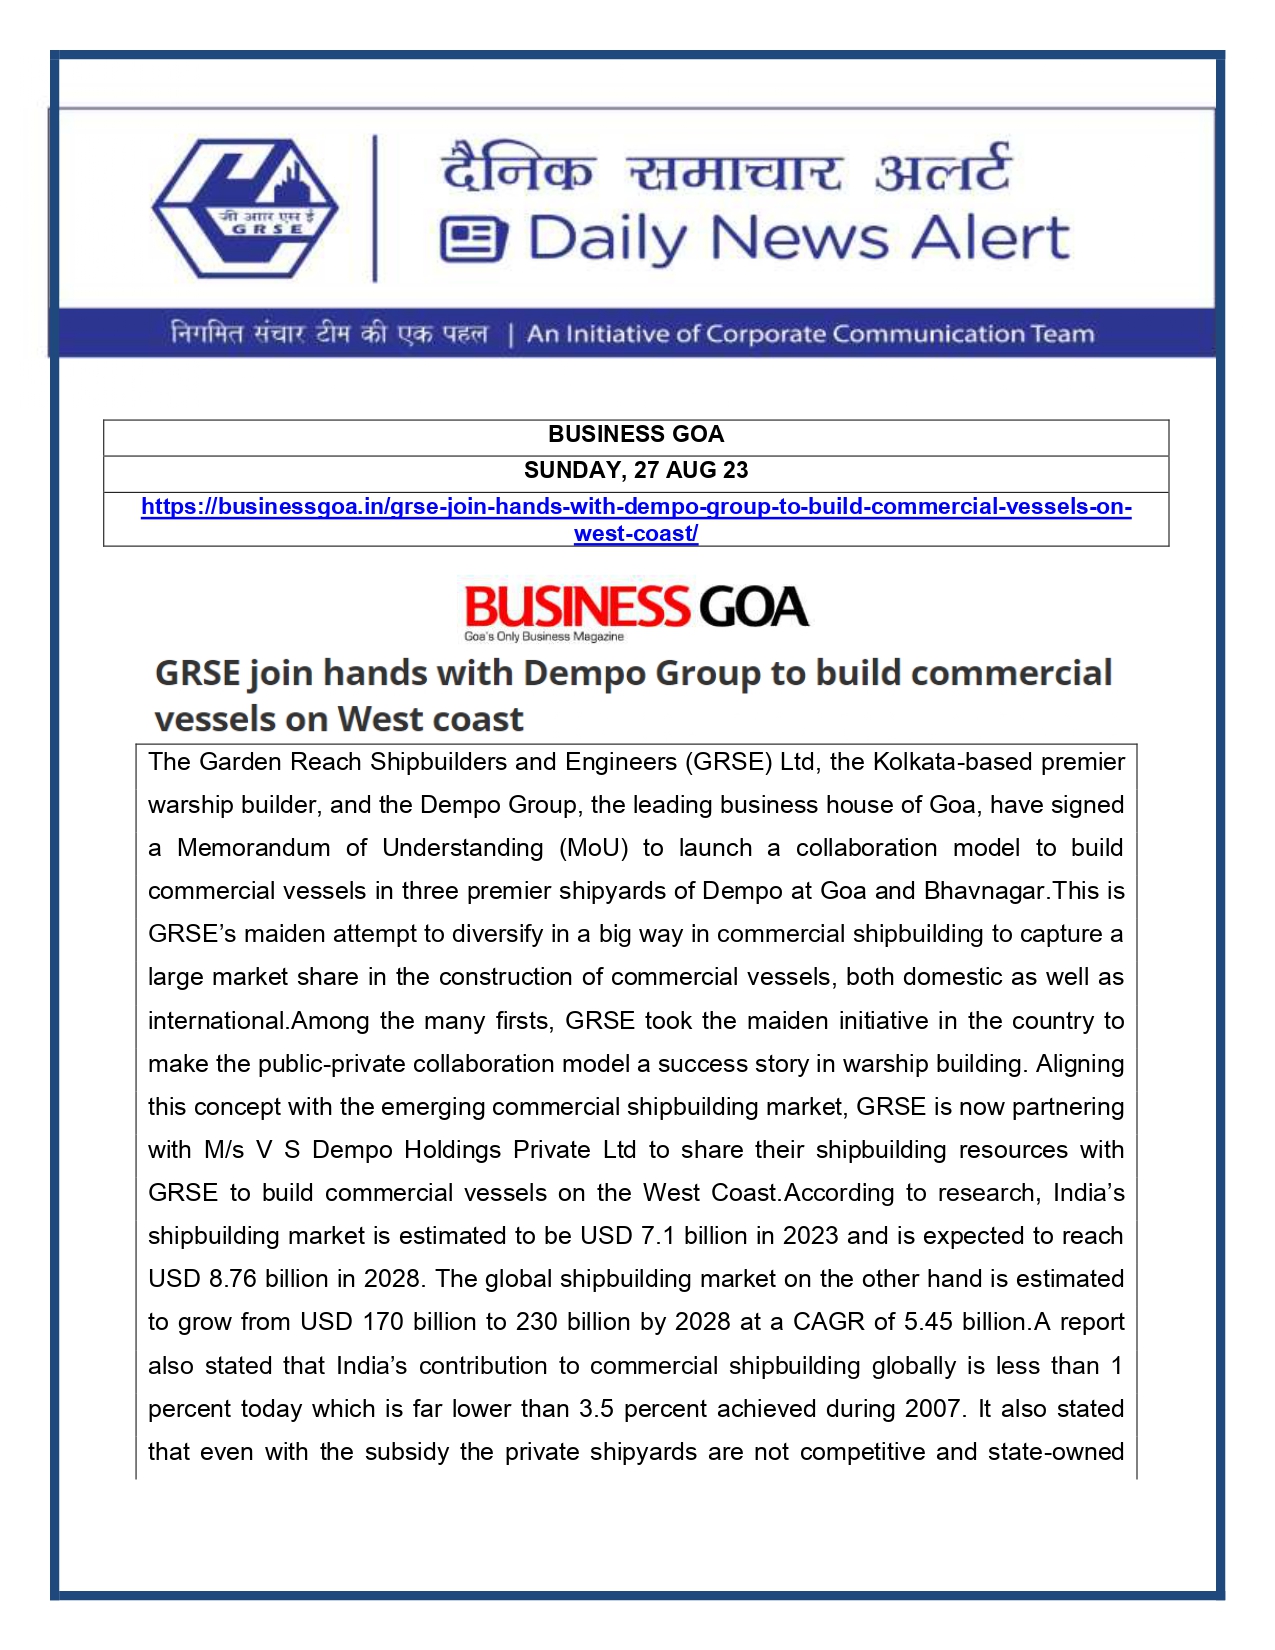 Press Coverage : Business Goa, 27 Aug 23 : GRSE join hands with DEMPO group to build commercial vessels on west coastPress Coverage : Business Goa, 27 Aug 23 : GRSE join hands with DEMPO group to build commercial vessels on west coast